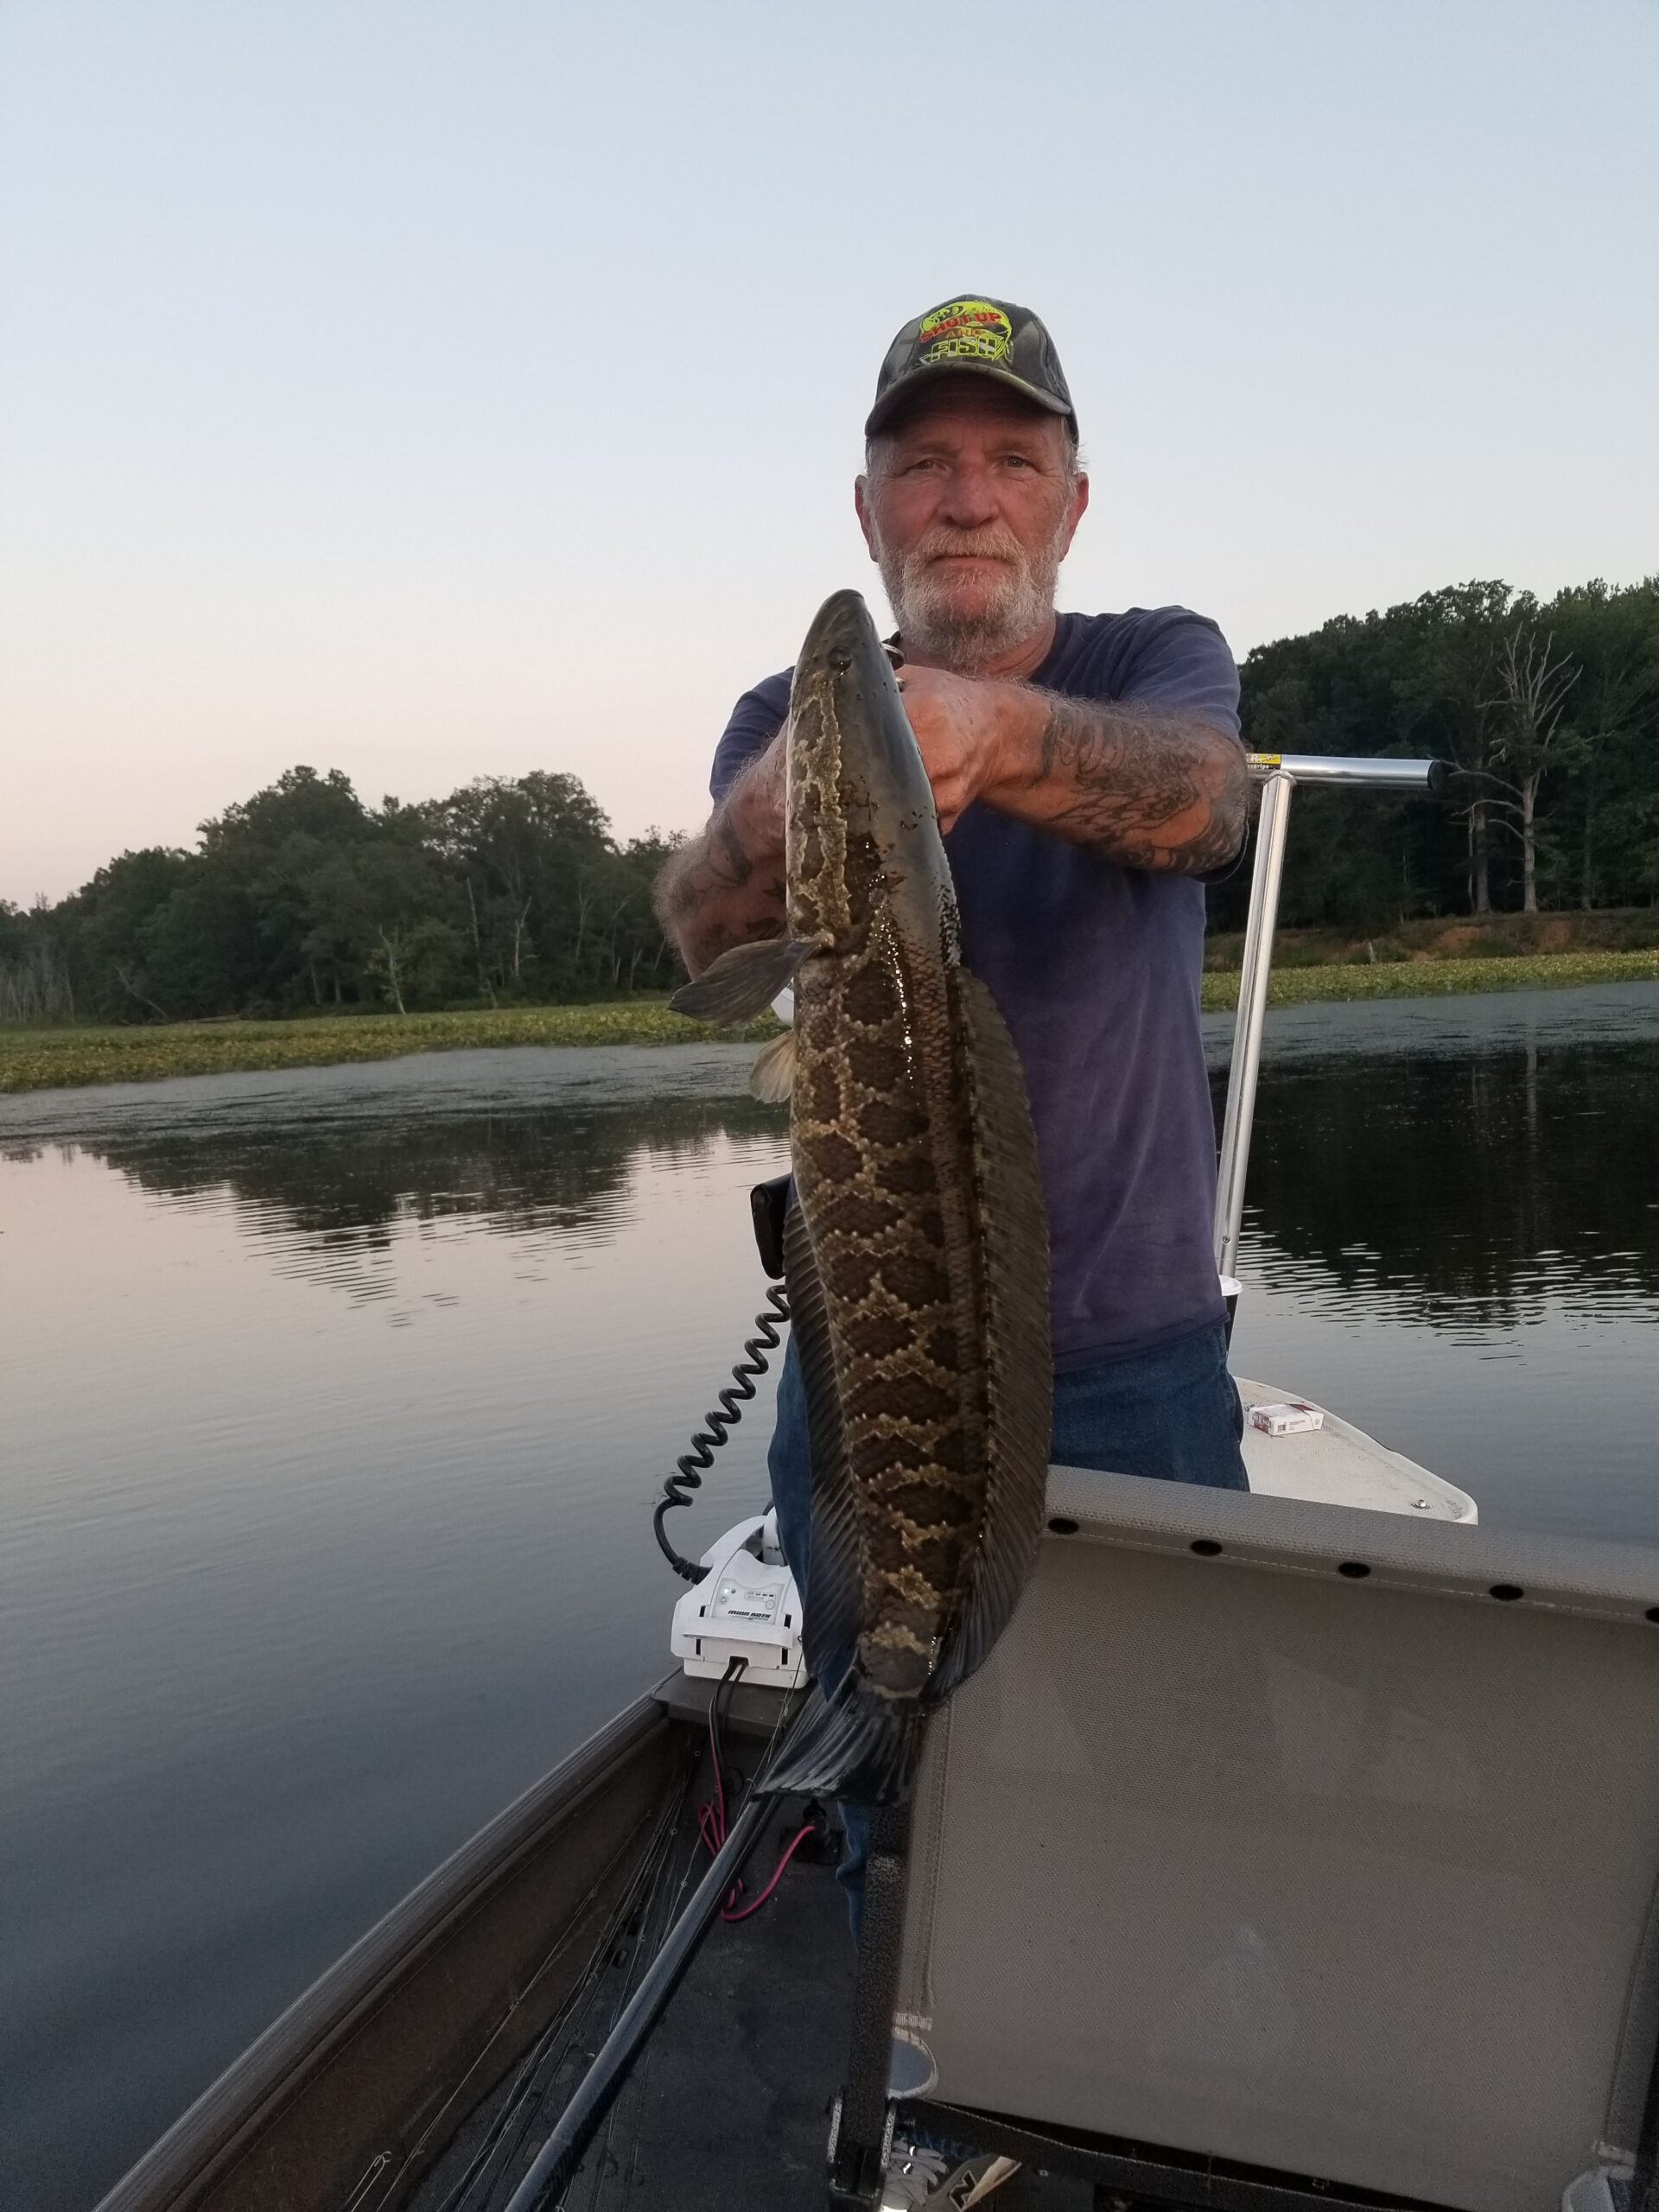 https://indianheadcharters.com/wp-content/uploads/2020/08/8-8-20-2-scaled.jpg